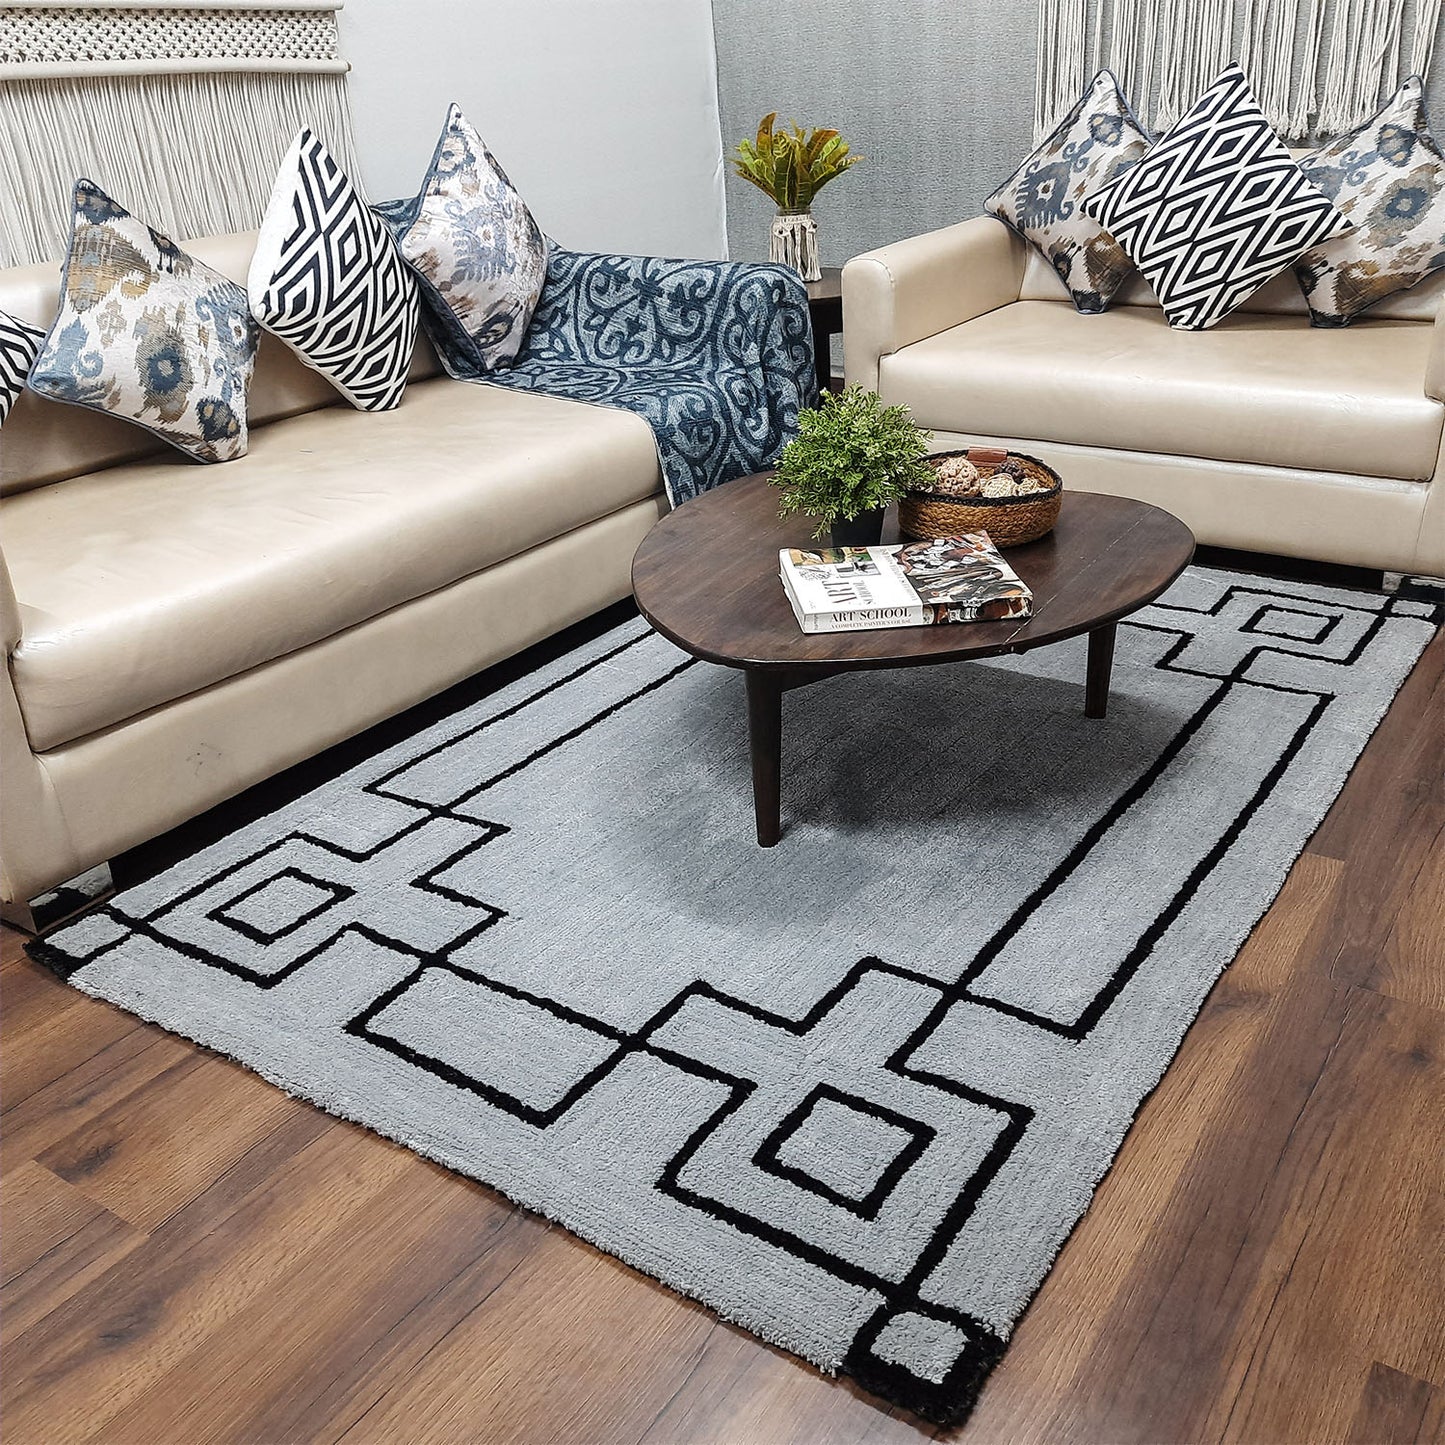 Avioni Luxury Collection- Plush Luxury Grey and Black Tone Carpet with 3d Traditional Design -Different Sizes Shaggy Fluffy Rugs and Carpet for Living Room